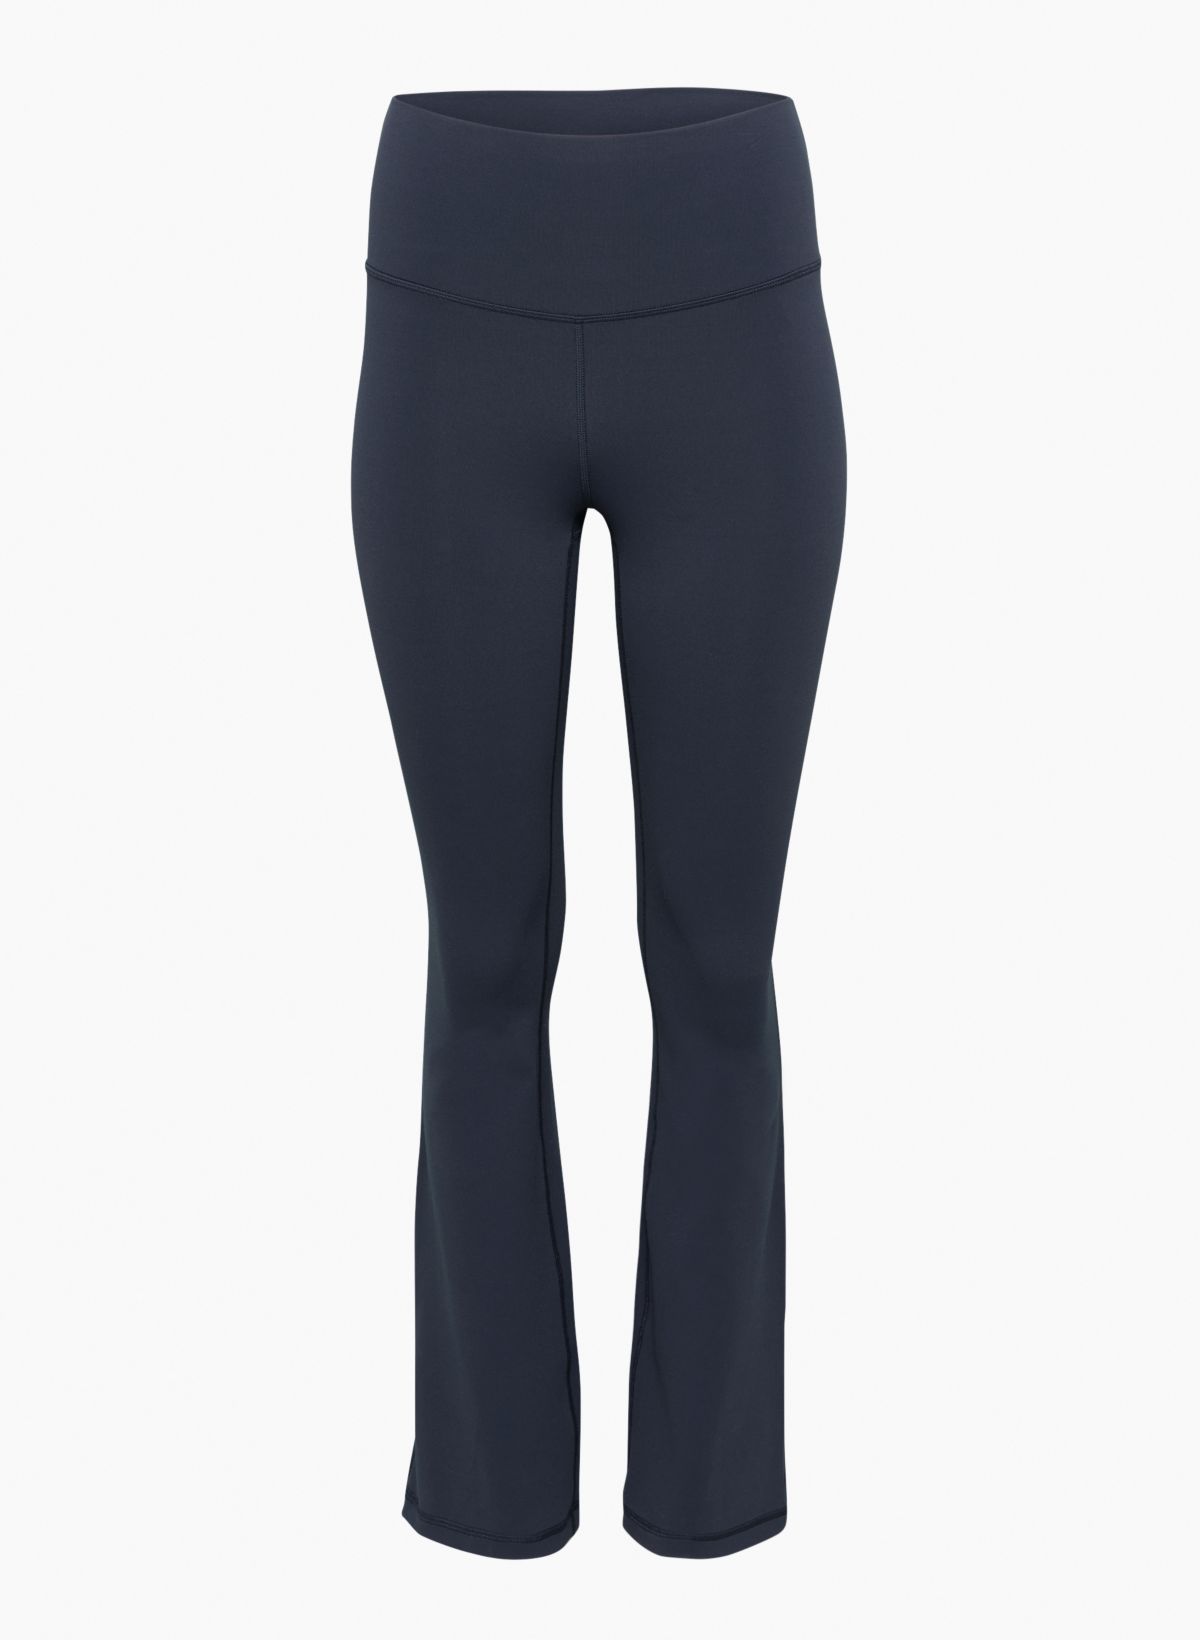 High Hip Lifting Aritzia Yoga Pants Flare For Women Elastic Waisted  Cardigan With Flare Detail, Slim Fit, And Fashionable T Shaped Design For  Leg Length And Fitness From Clothing1713, $21.04